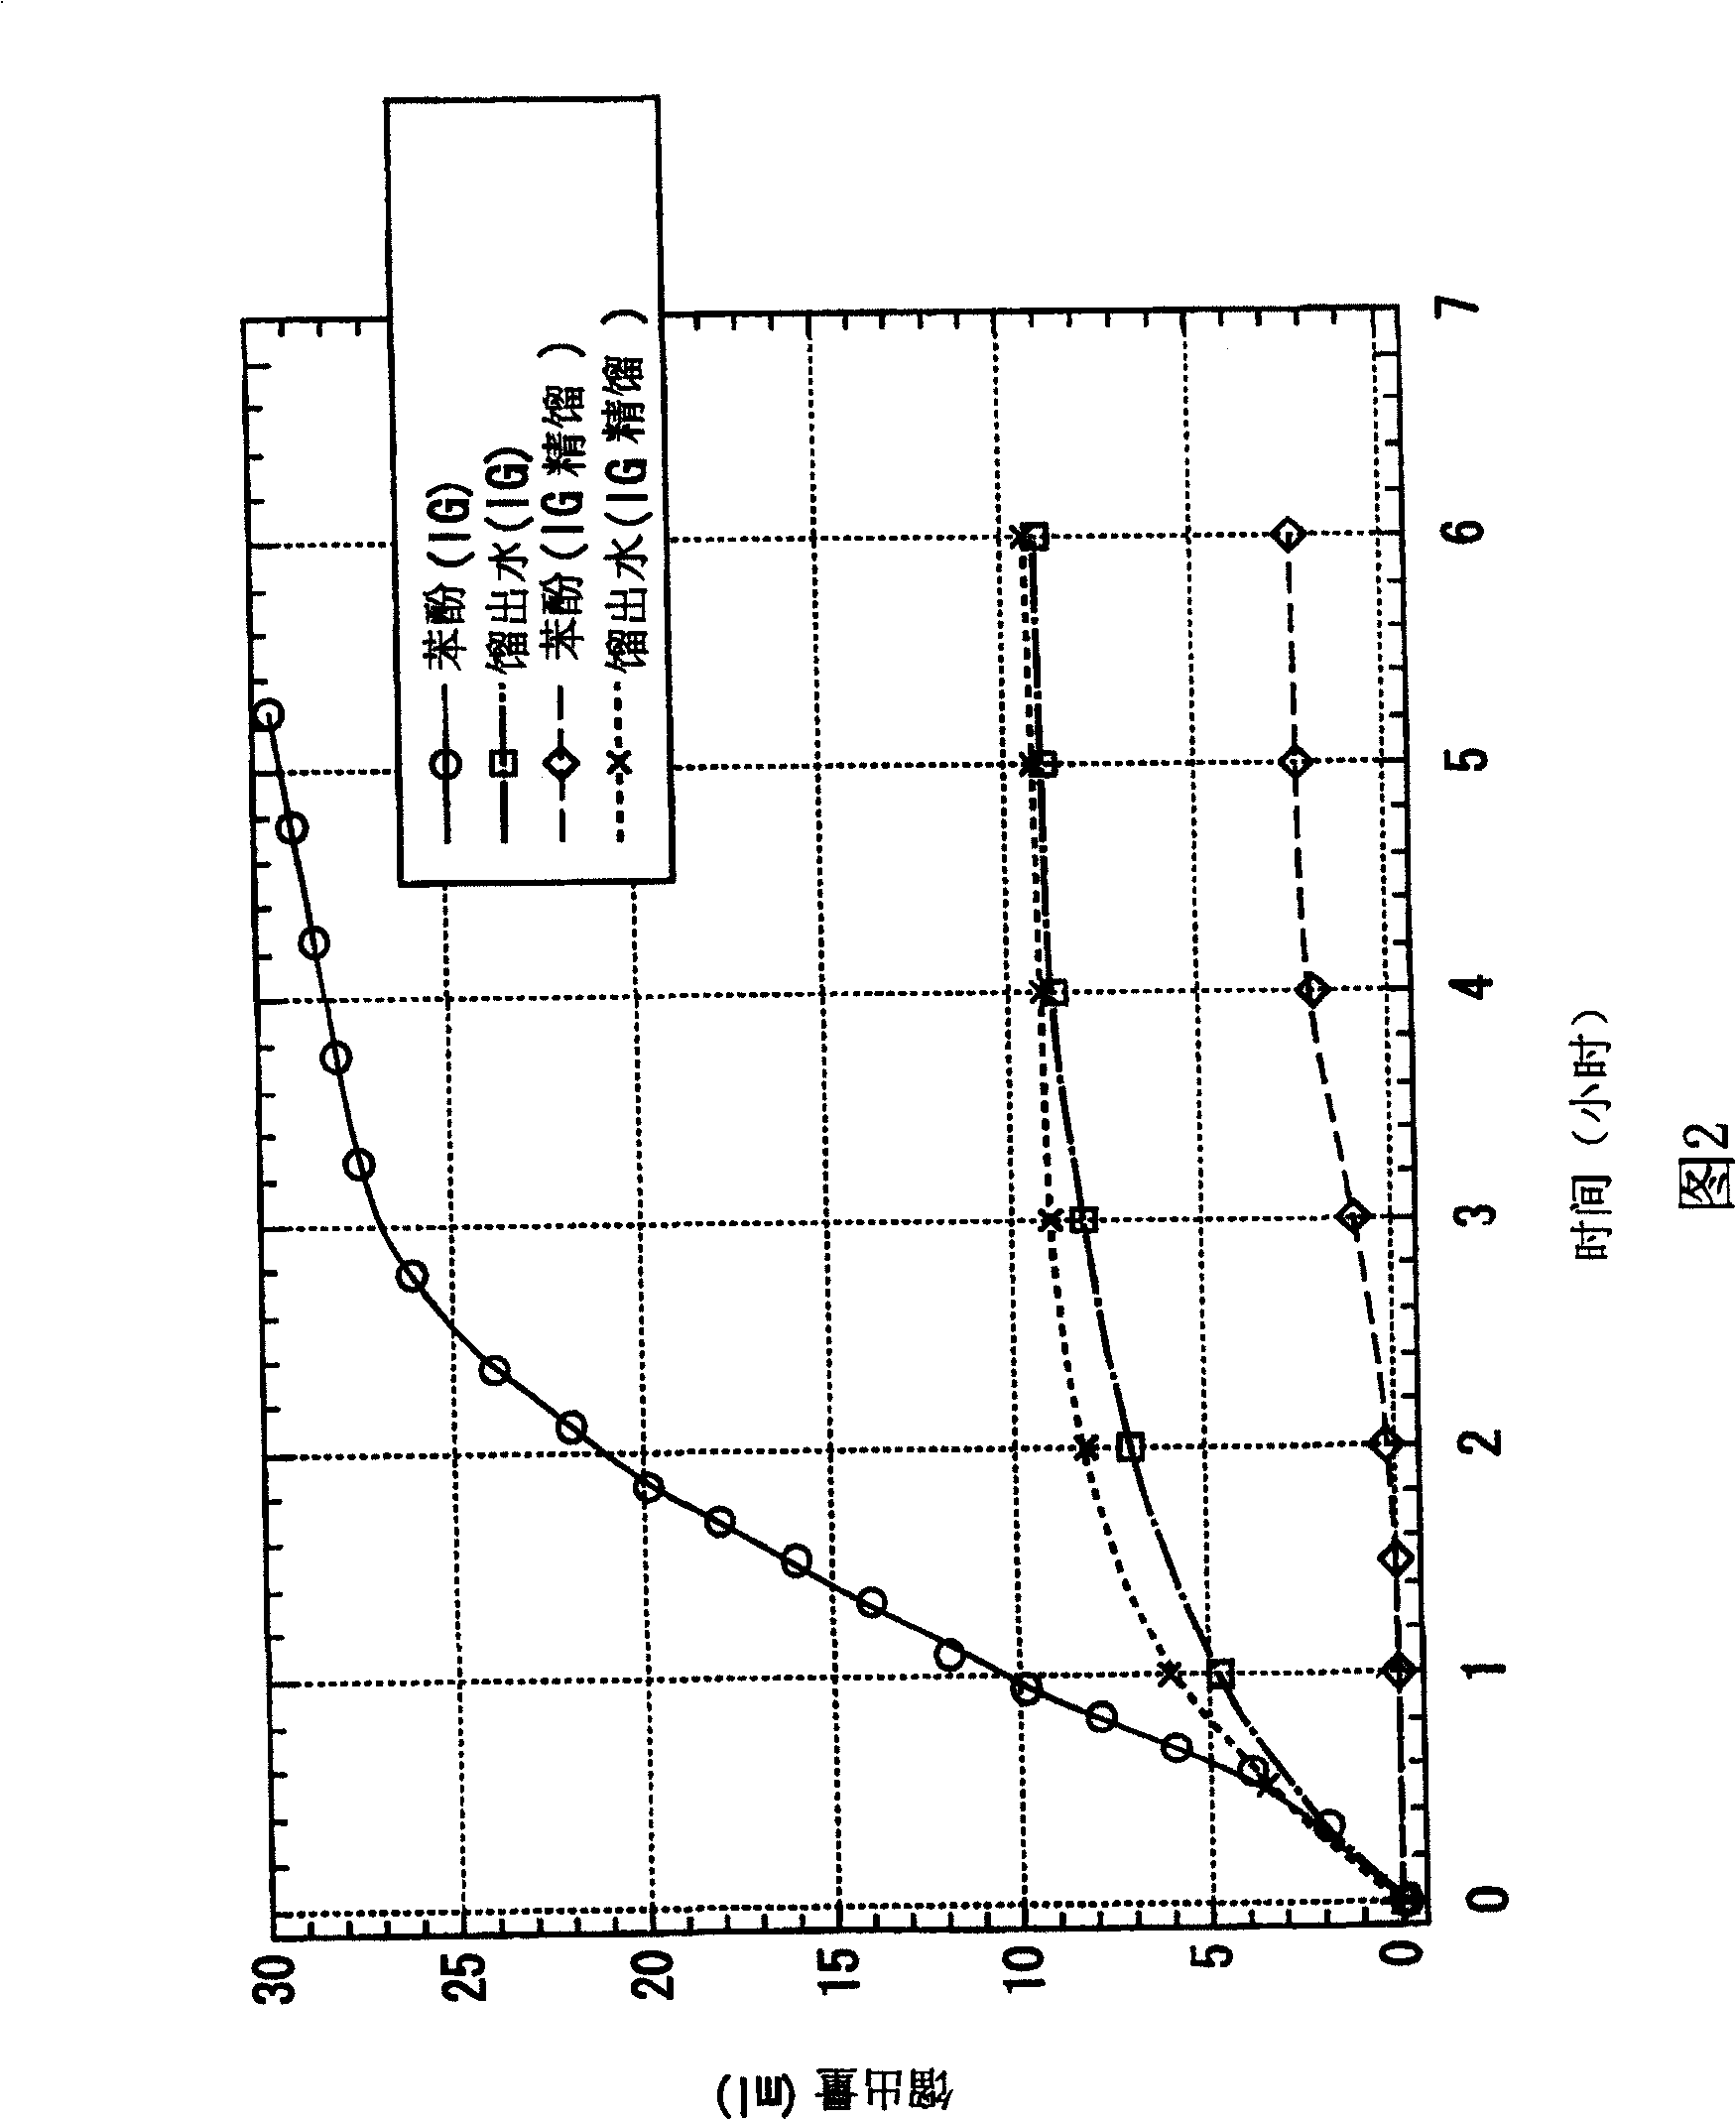 Process for producing 4,4'-bisphenol sulfone